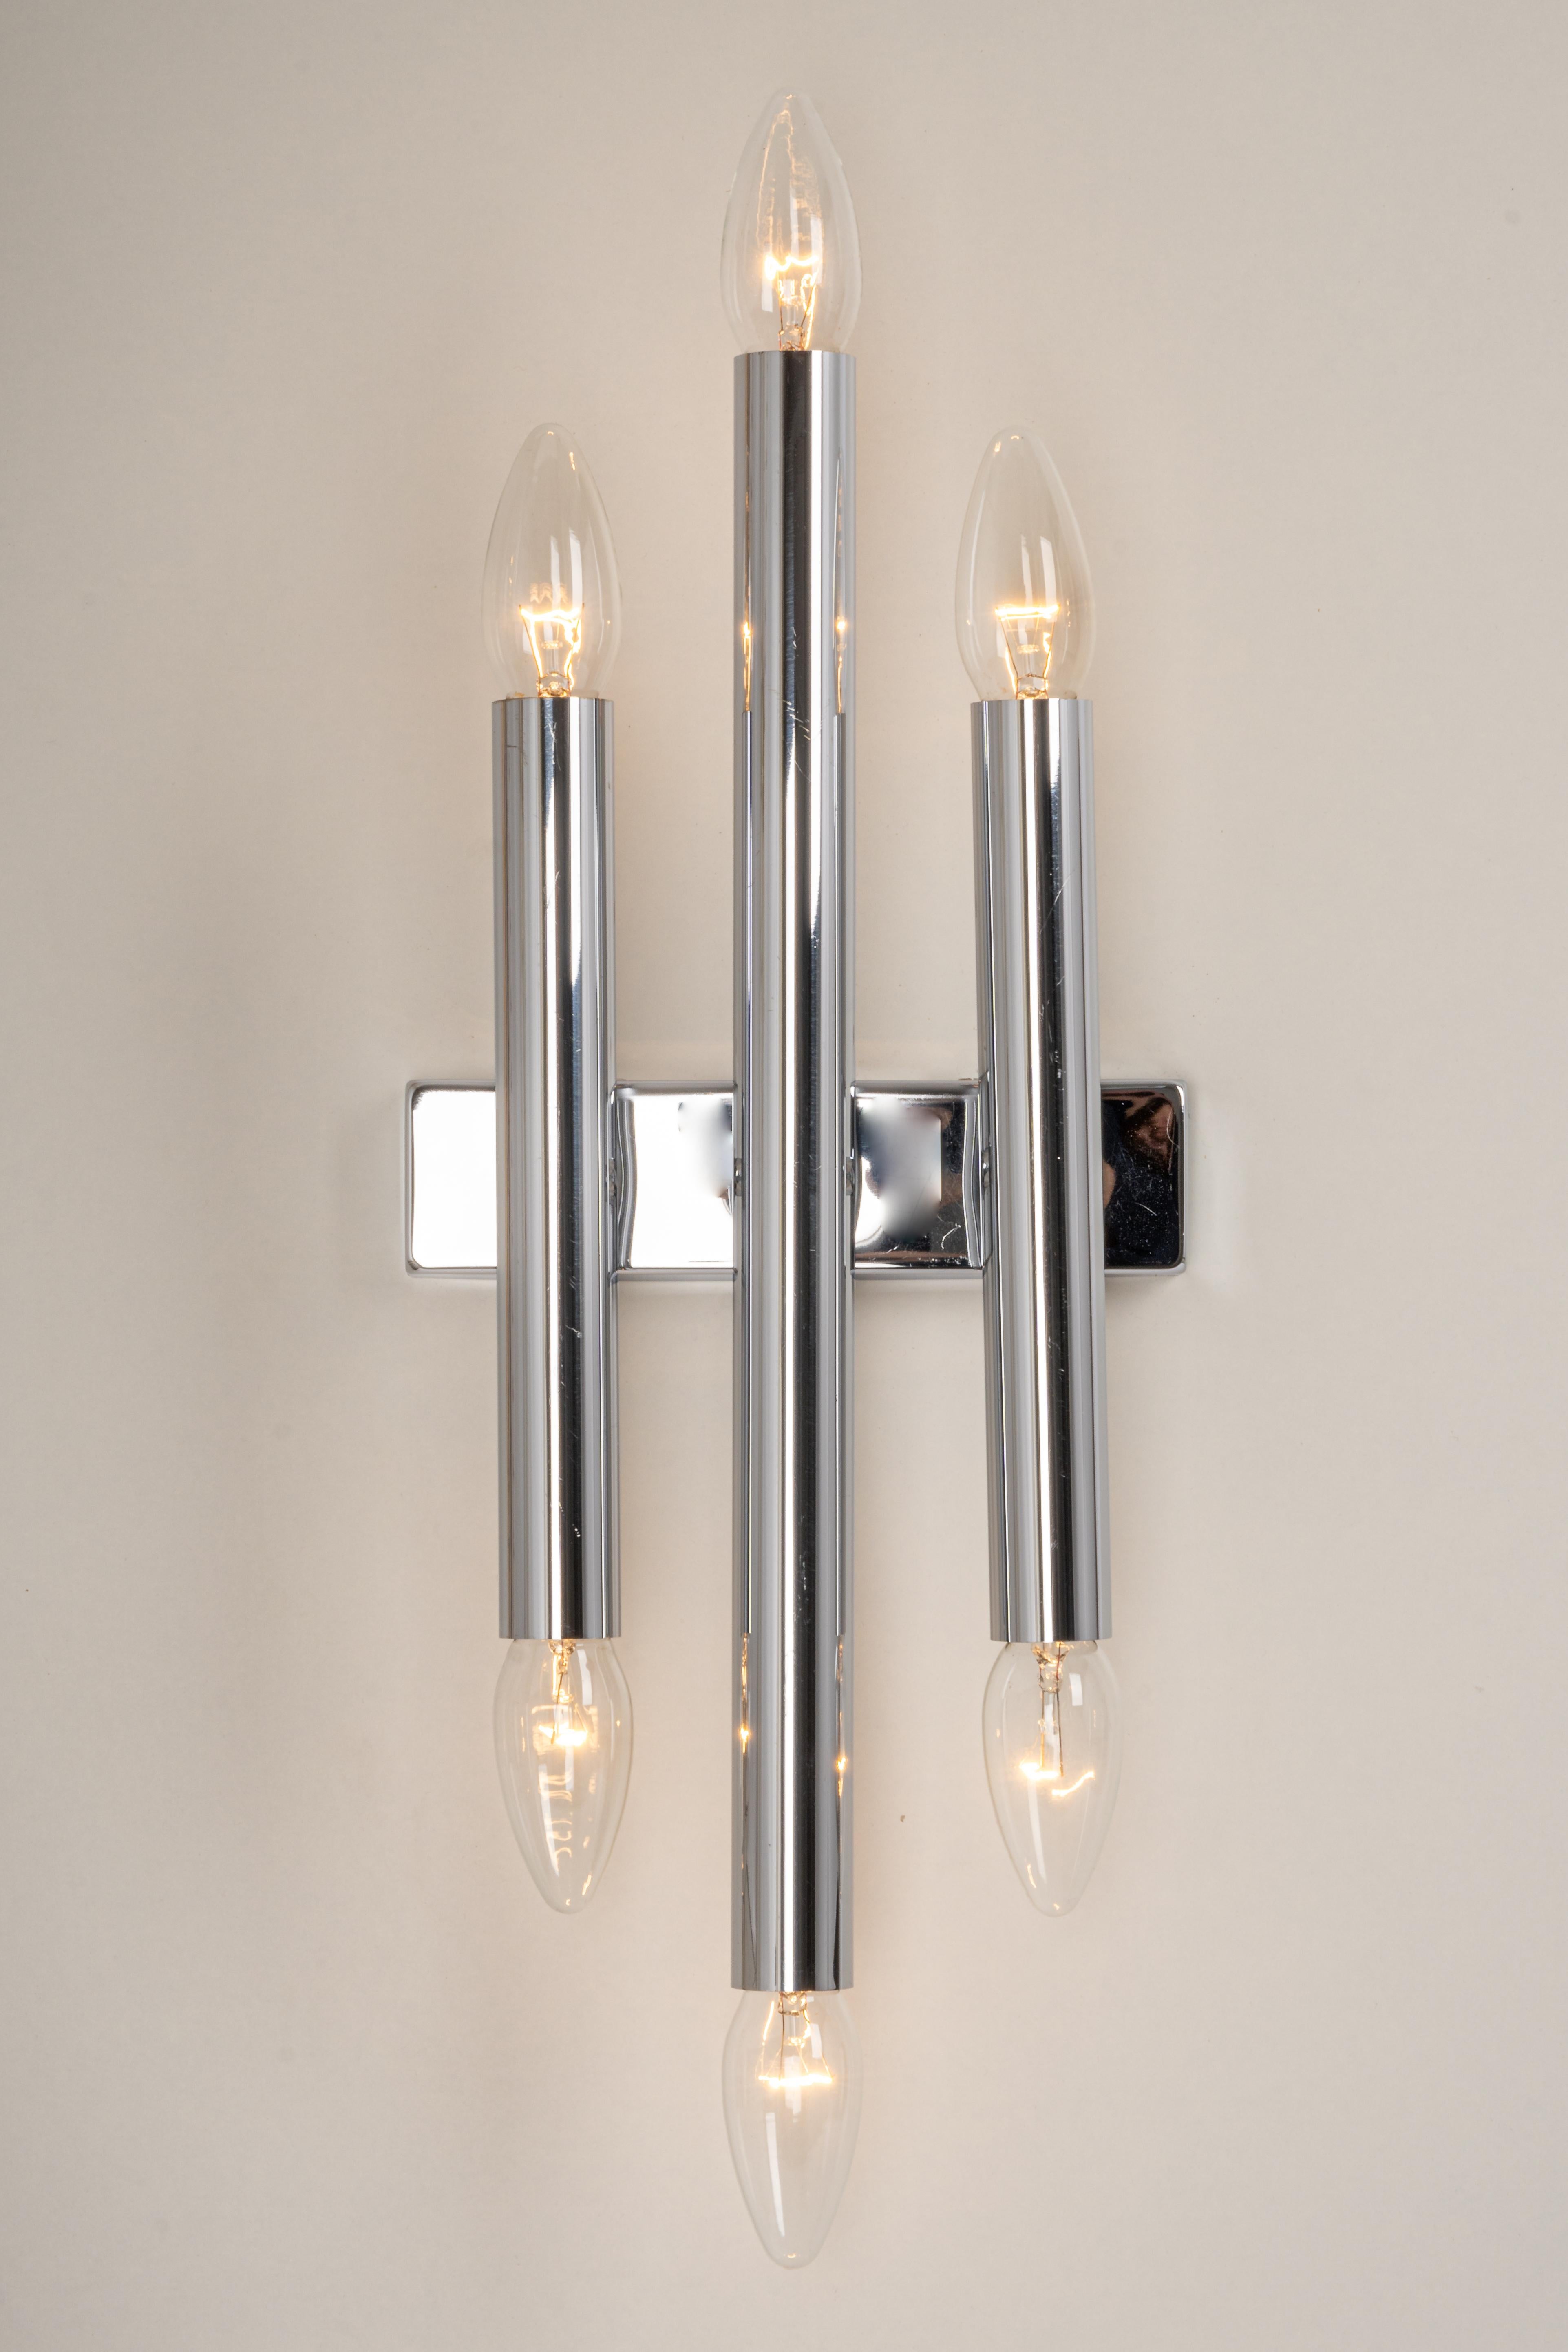 Pair of Large Italian Chrome Wall Sconces Sciolari Style, 1970s For Sale 3